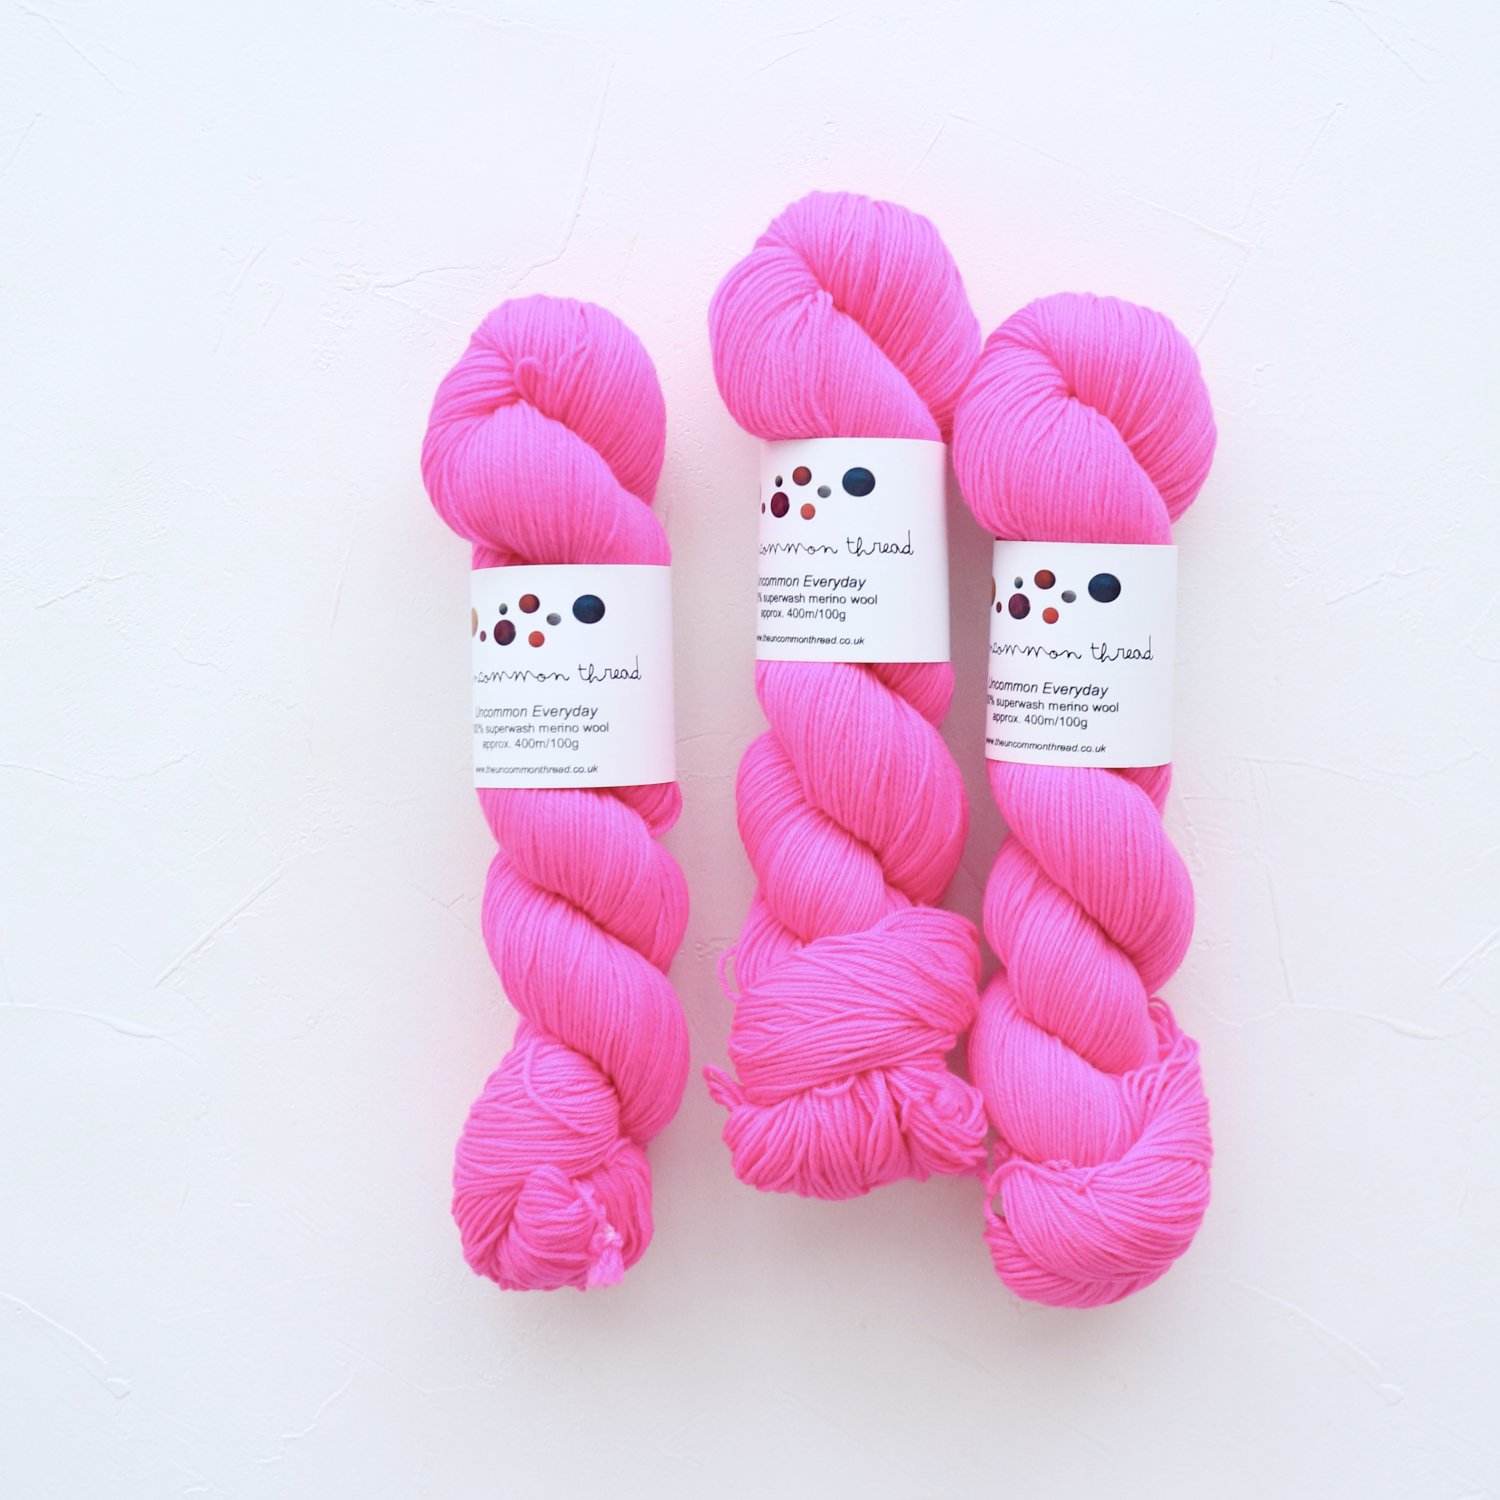 【The Uncommon Thread】<br>Uncommon Everyday<br>Hi-Vis Pink